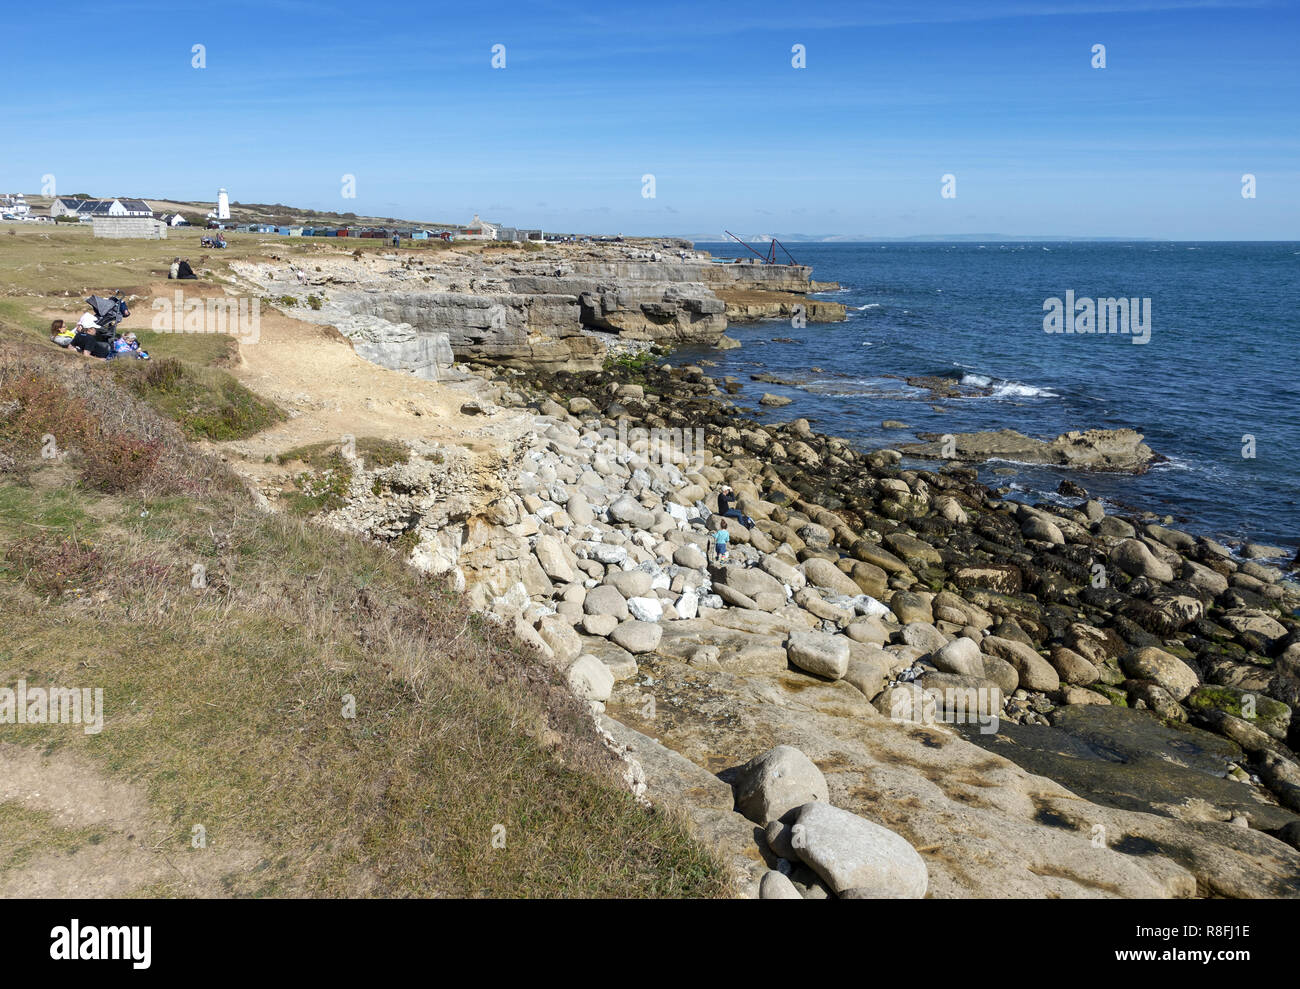 View of the coastline and small fishing huts on the Isle of Portland, Weymouth, Dorset, England, UK Stock Photo